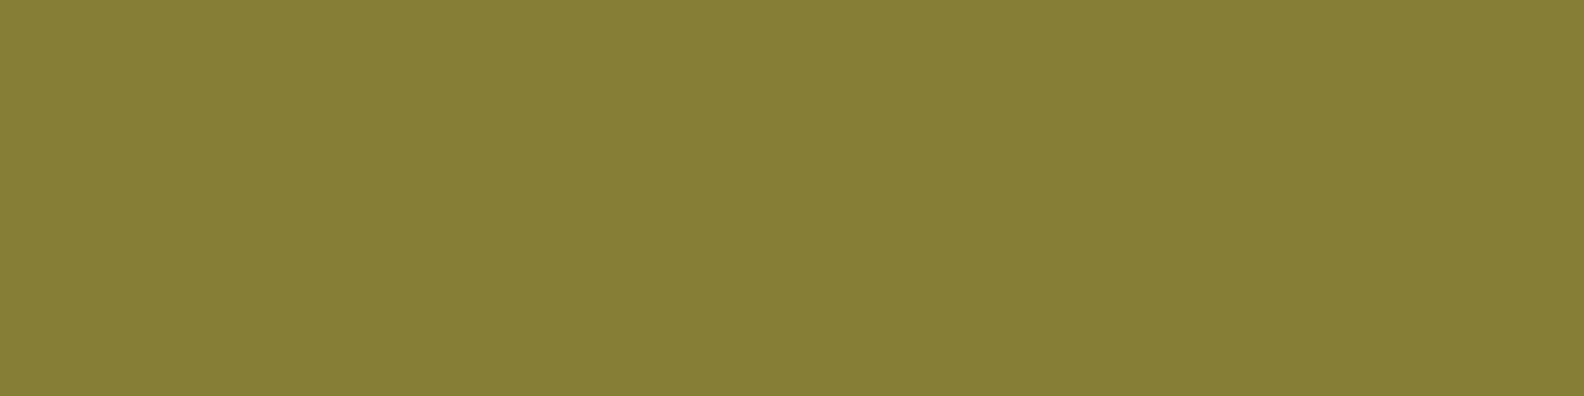 1584x396 Old Moss Green Solid Color Background